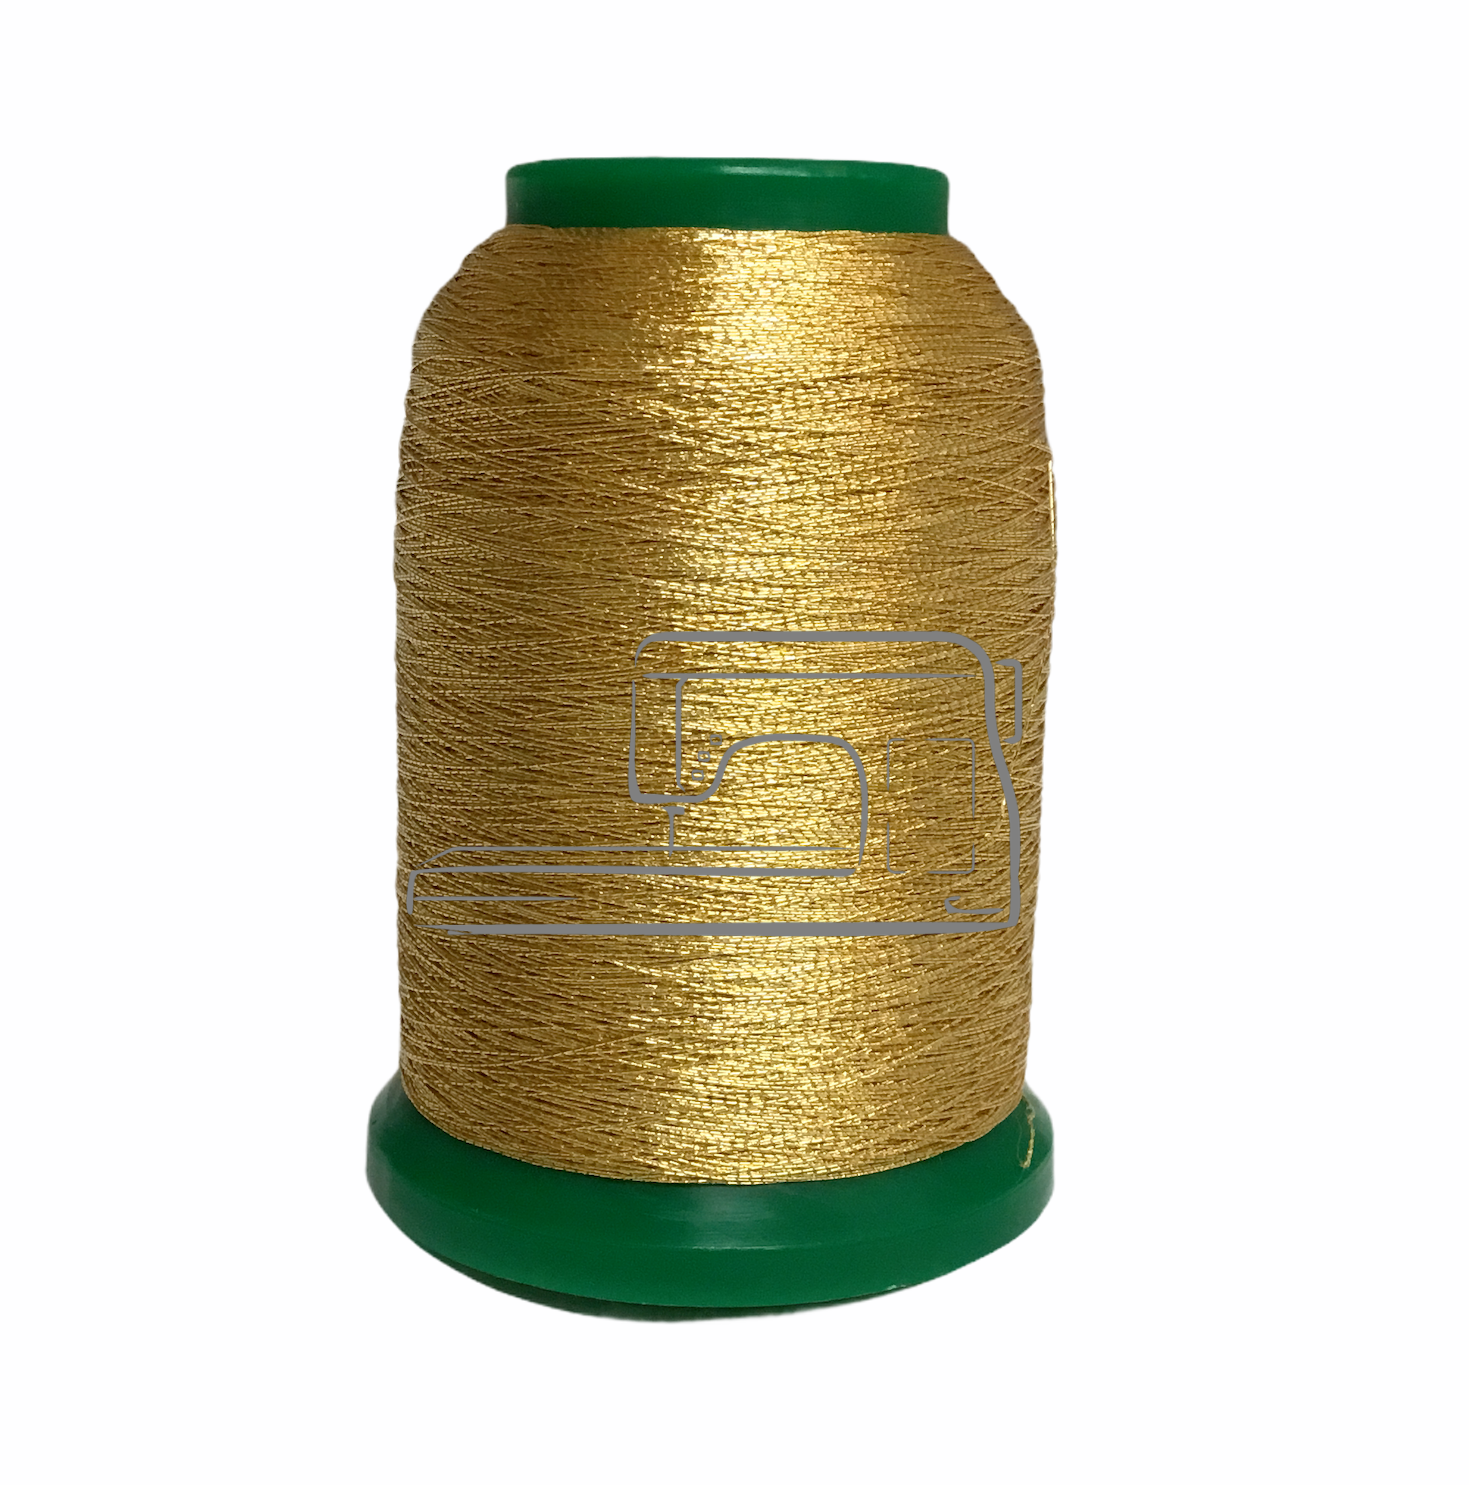 Isamet Isamet metallic thread 0500 1000 m for sewing and embroidery